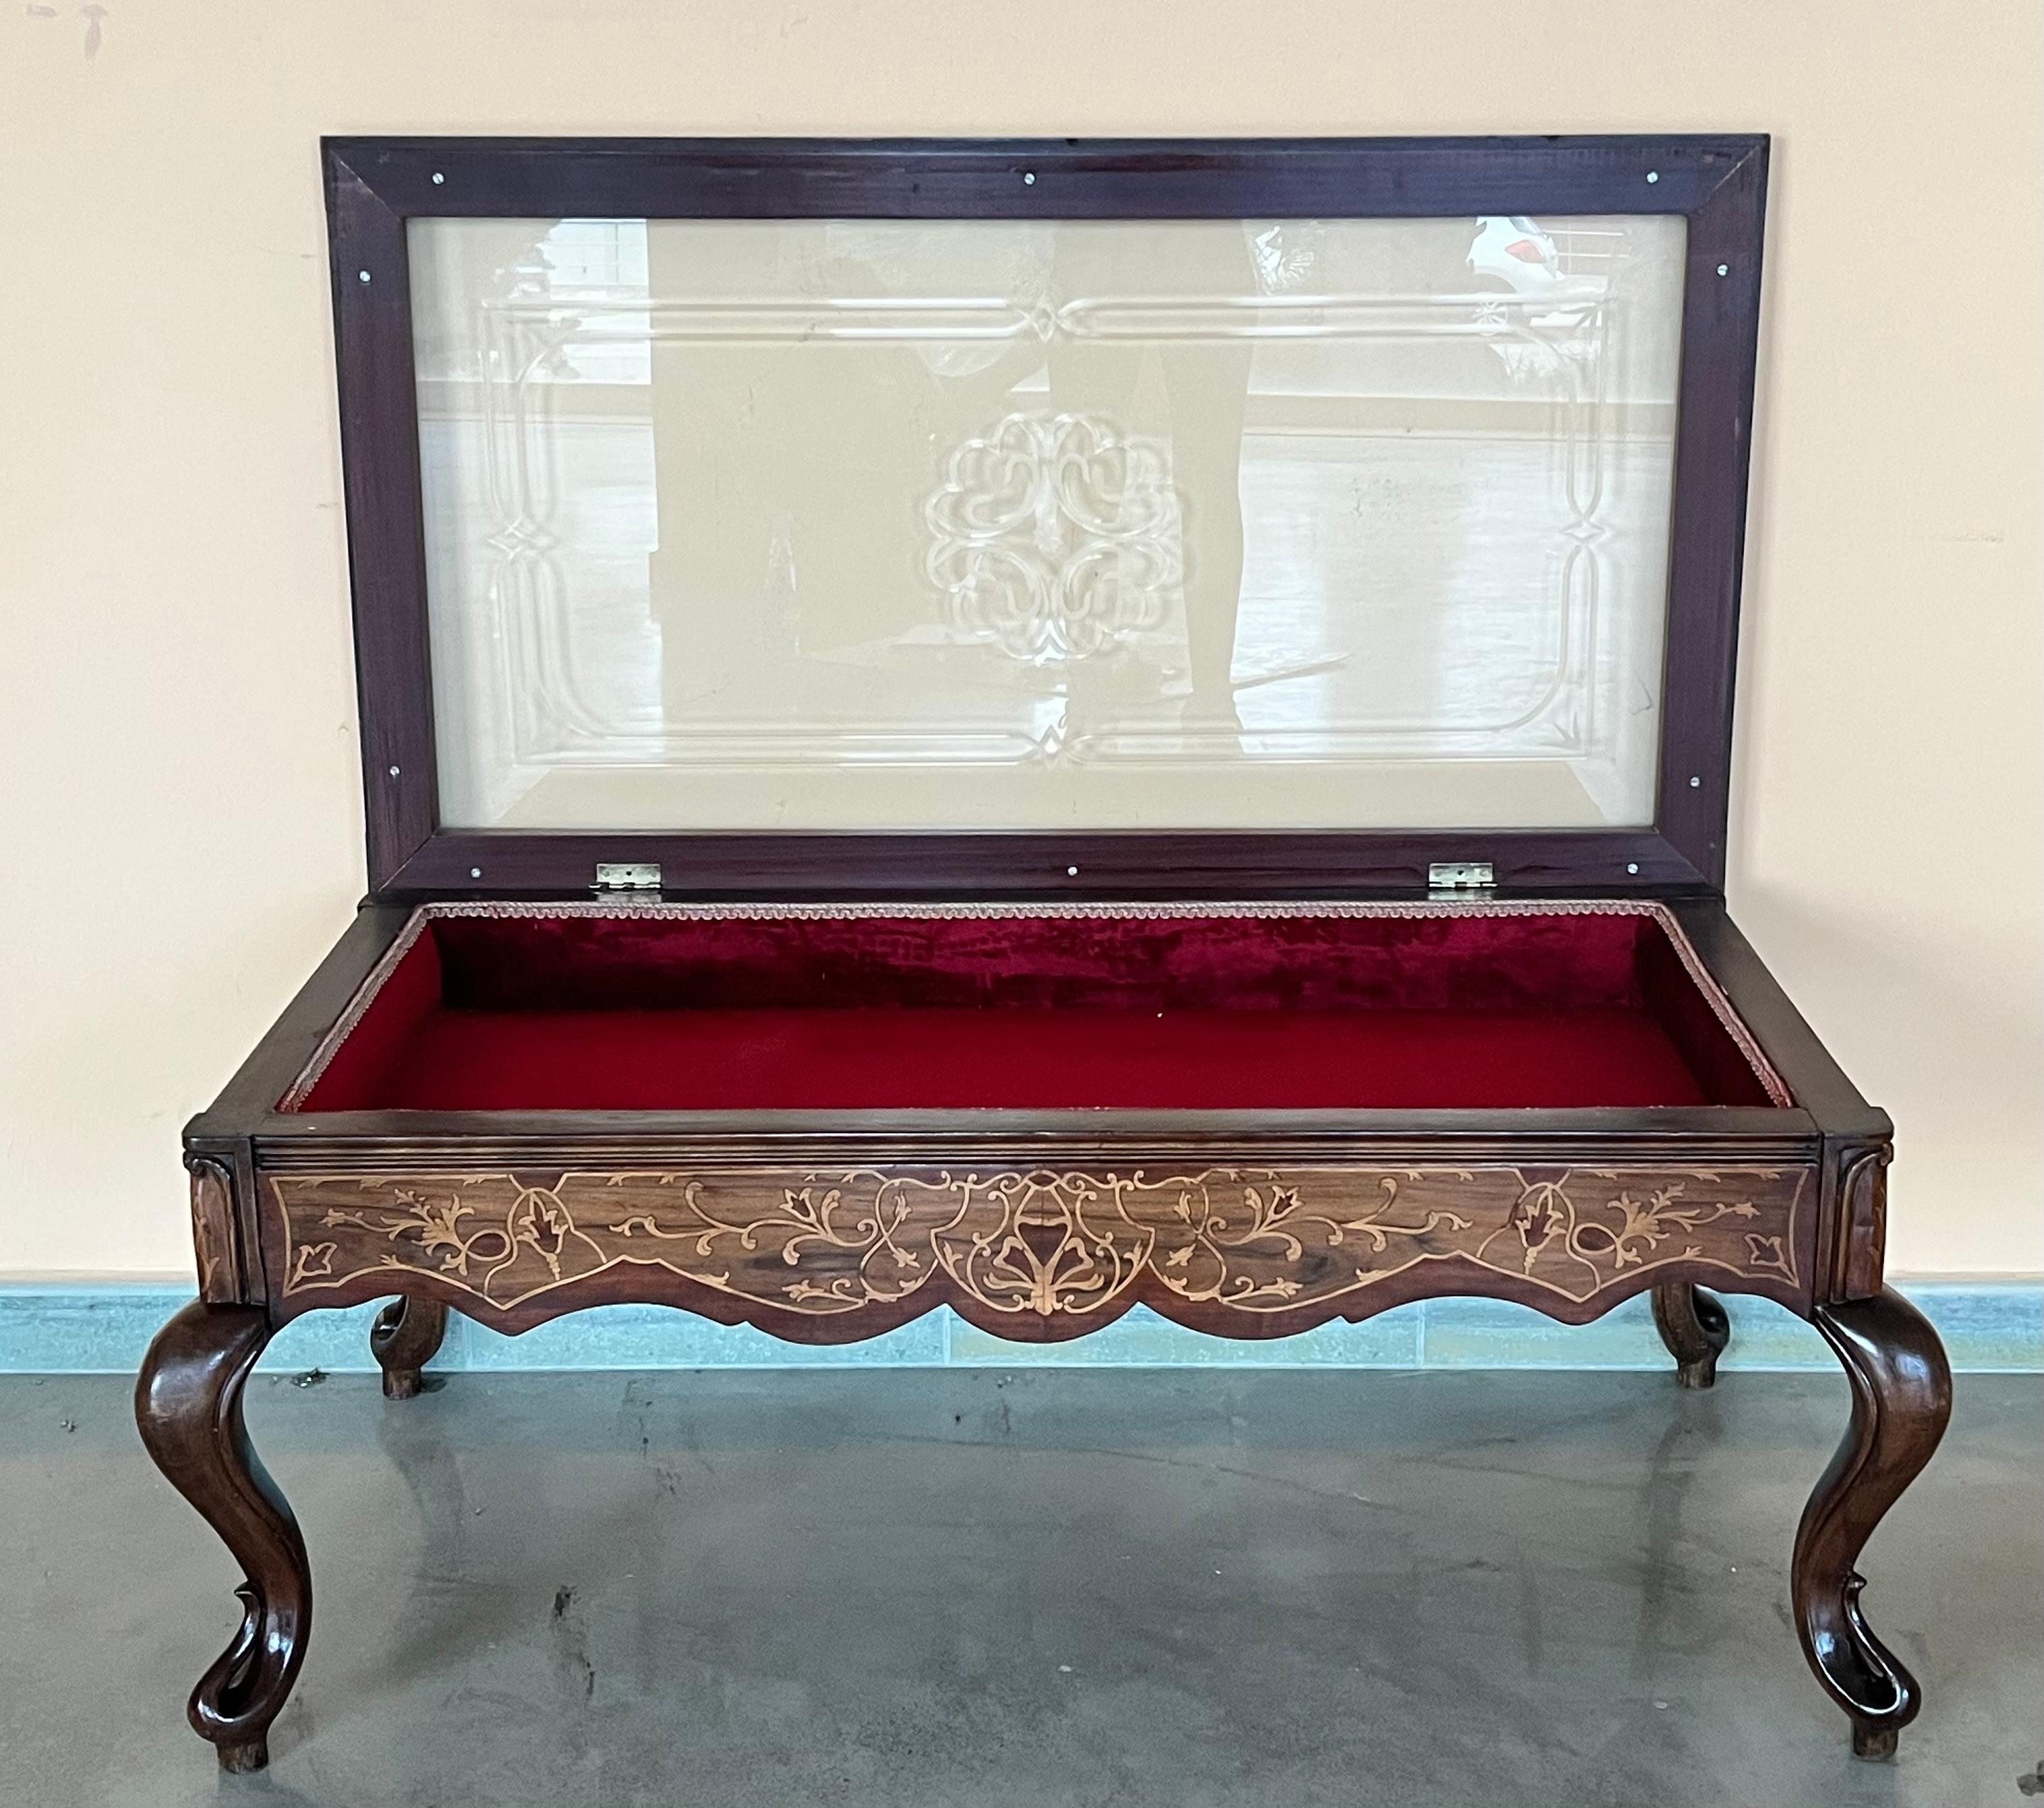 For sale is a fine quality 20th century Bijouterie table. The top of the table as a superbly inlaid edge around the hinged lid. The lid lifts to reveal a velvet lined interior. The table stands on elegant shaped and tapered cabriole legs, each with